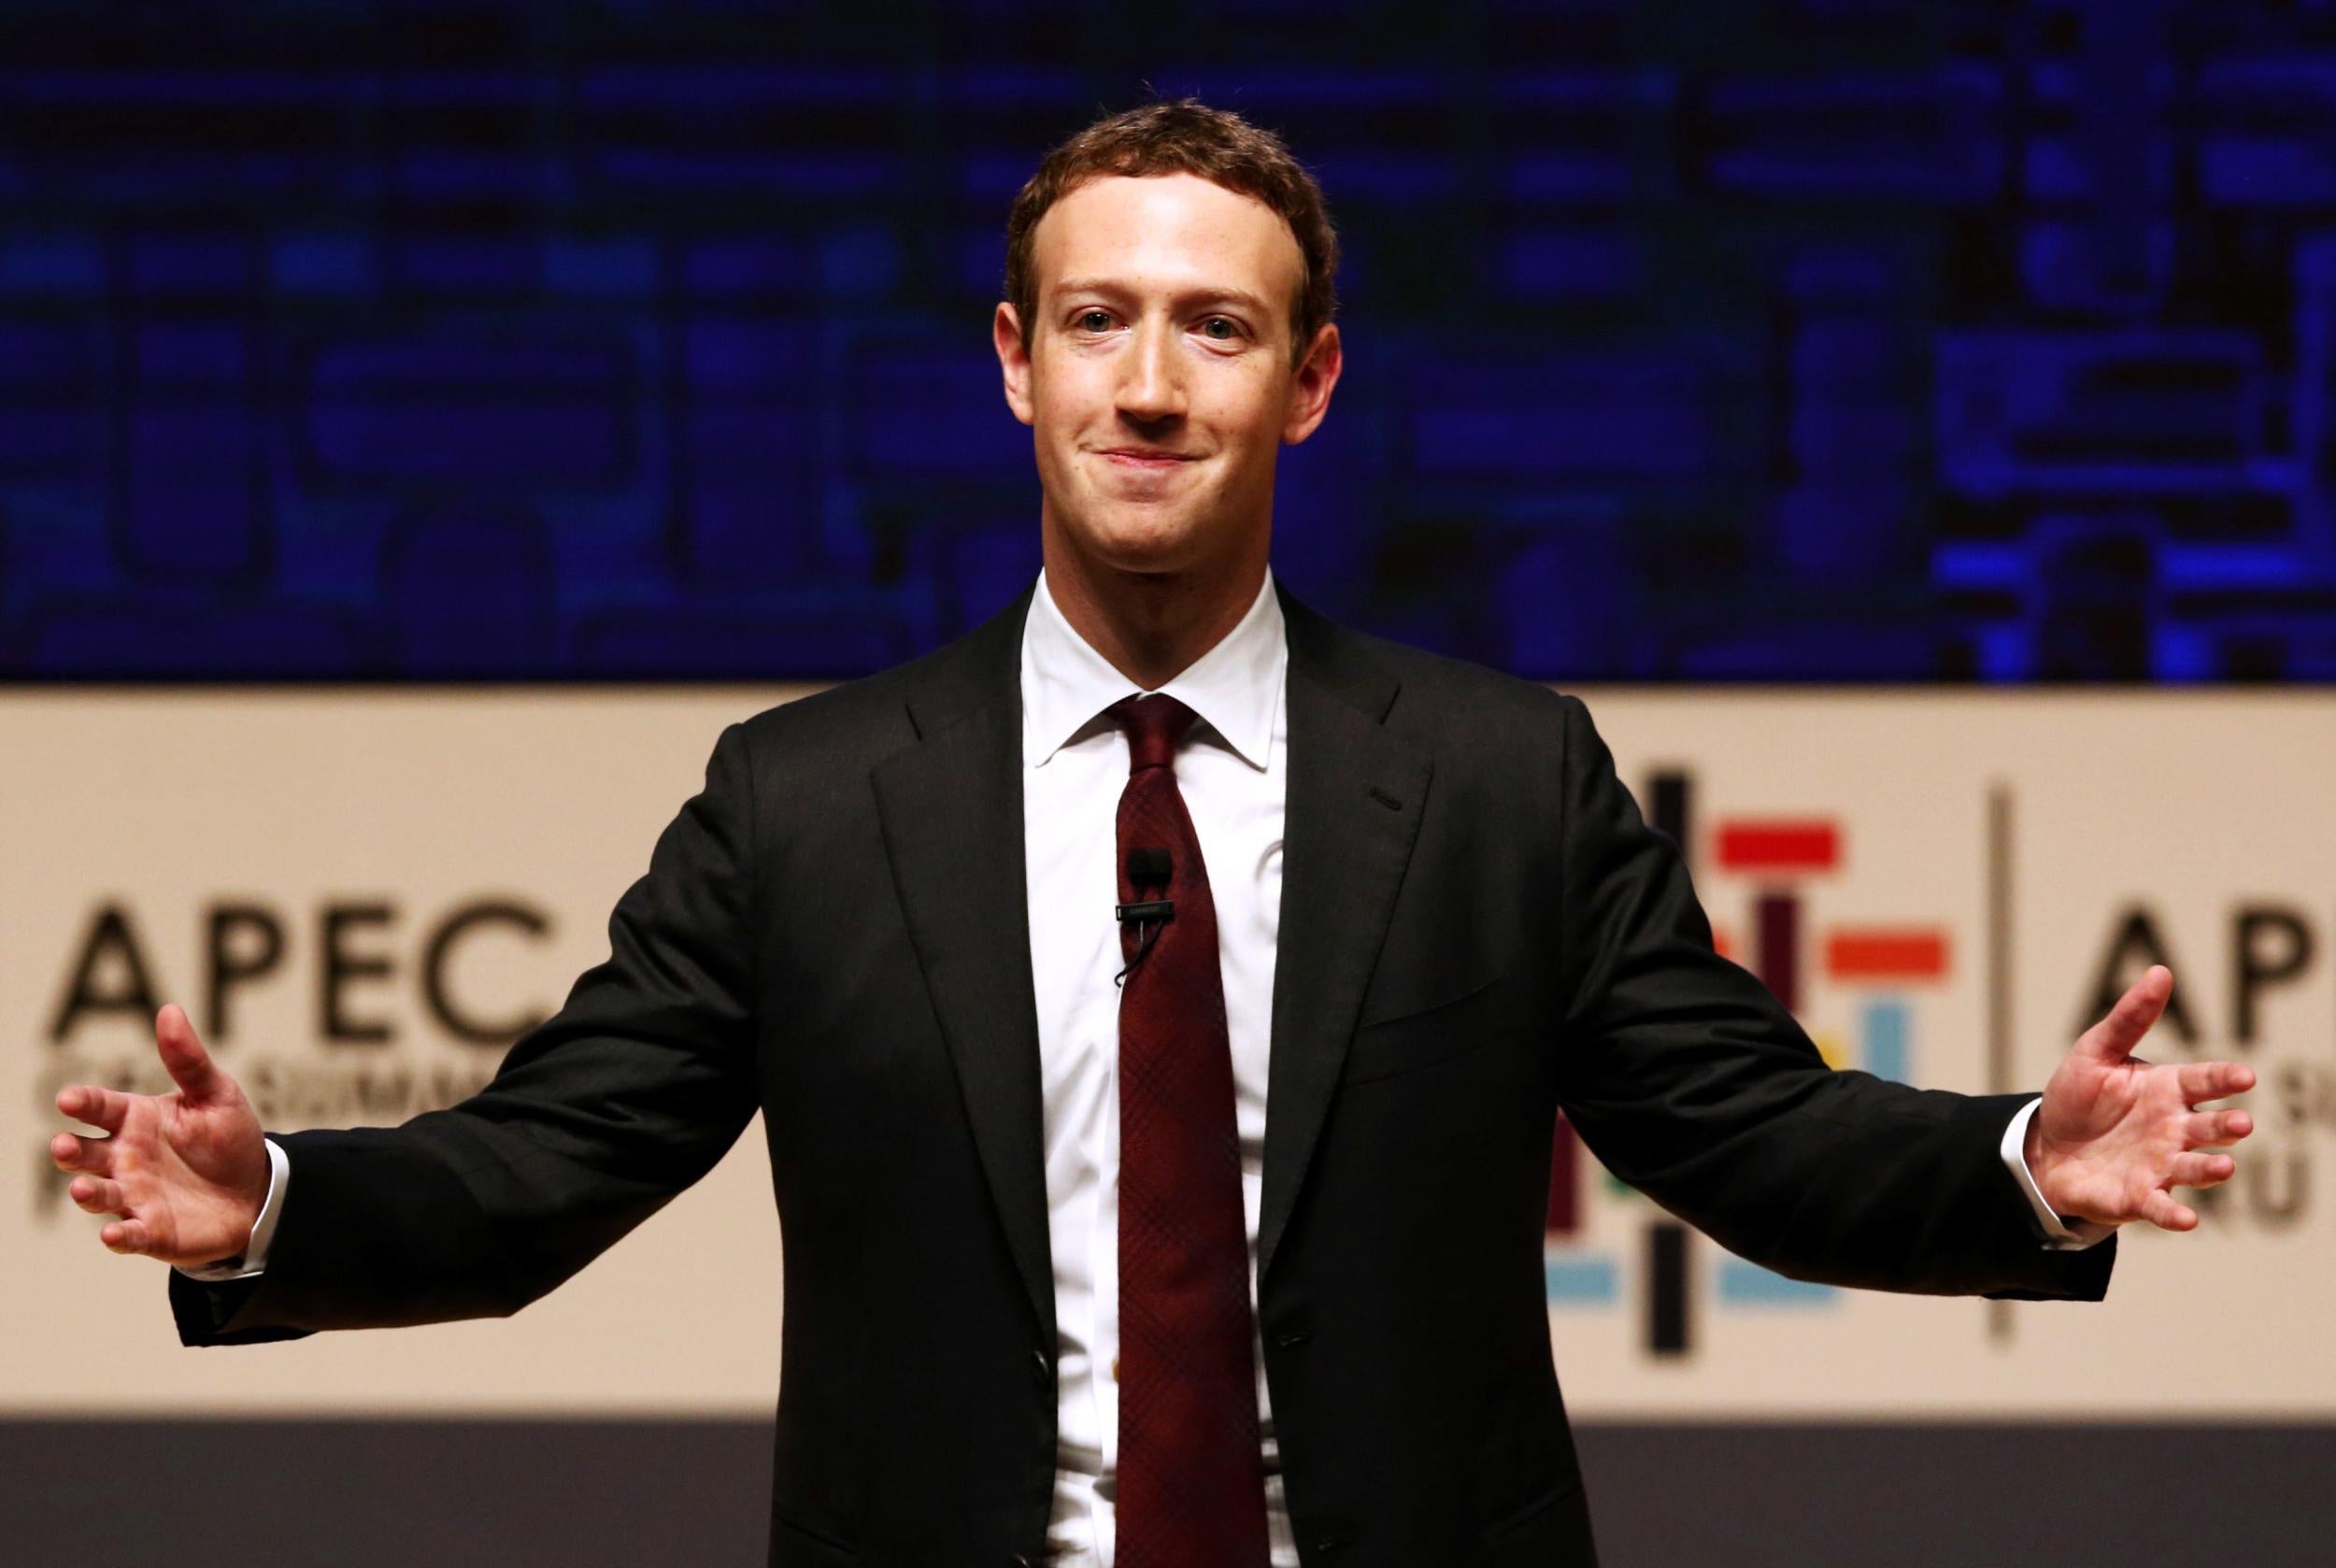 Mark Zuckerberg gestures while addressing the audience during a meeting of the APEC (Asia-Pacific Economic Cooperation) CEO Summit in Lima, Peru, November 19, 2016